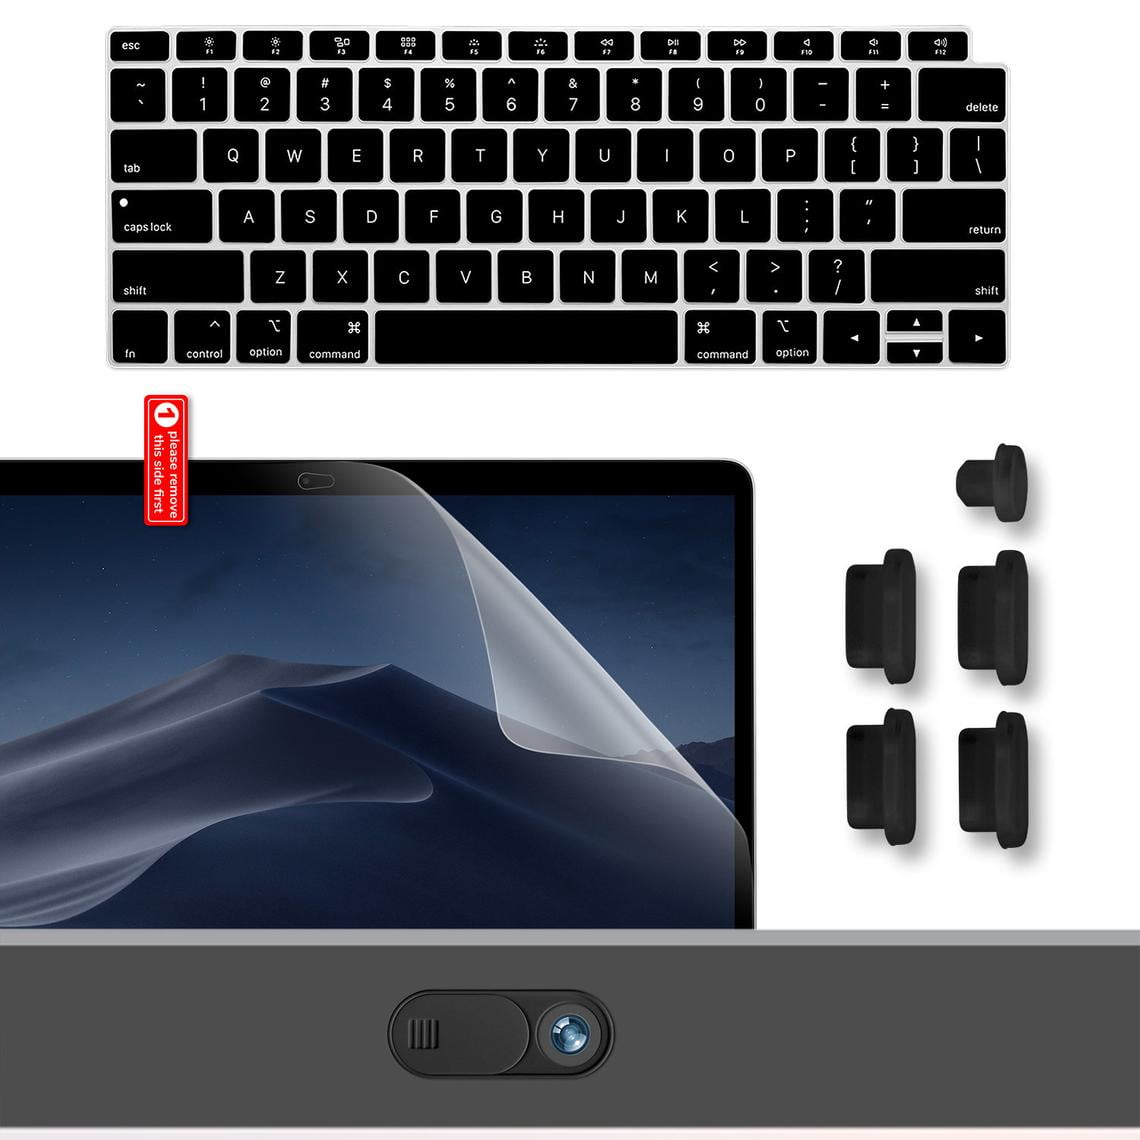 New MacBook Air Inch 2020 2019 2018 Accessories Kit A2337 w/ M1 A2179 Webcam Cover, Anti Dust Plugs, Keyboard Cover, Screen Protector 4 in 1 - Walmart.com